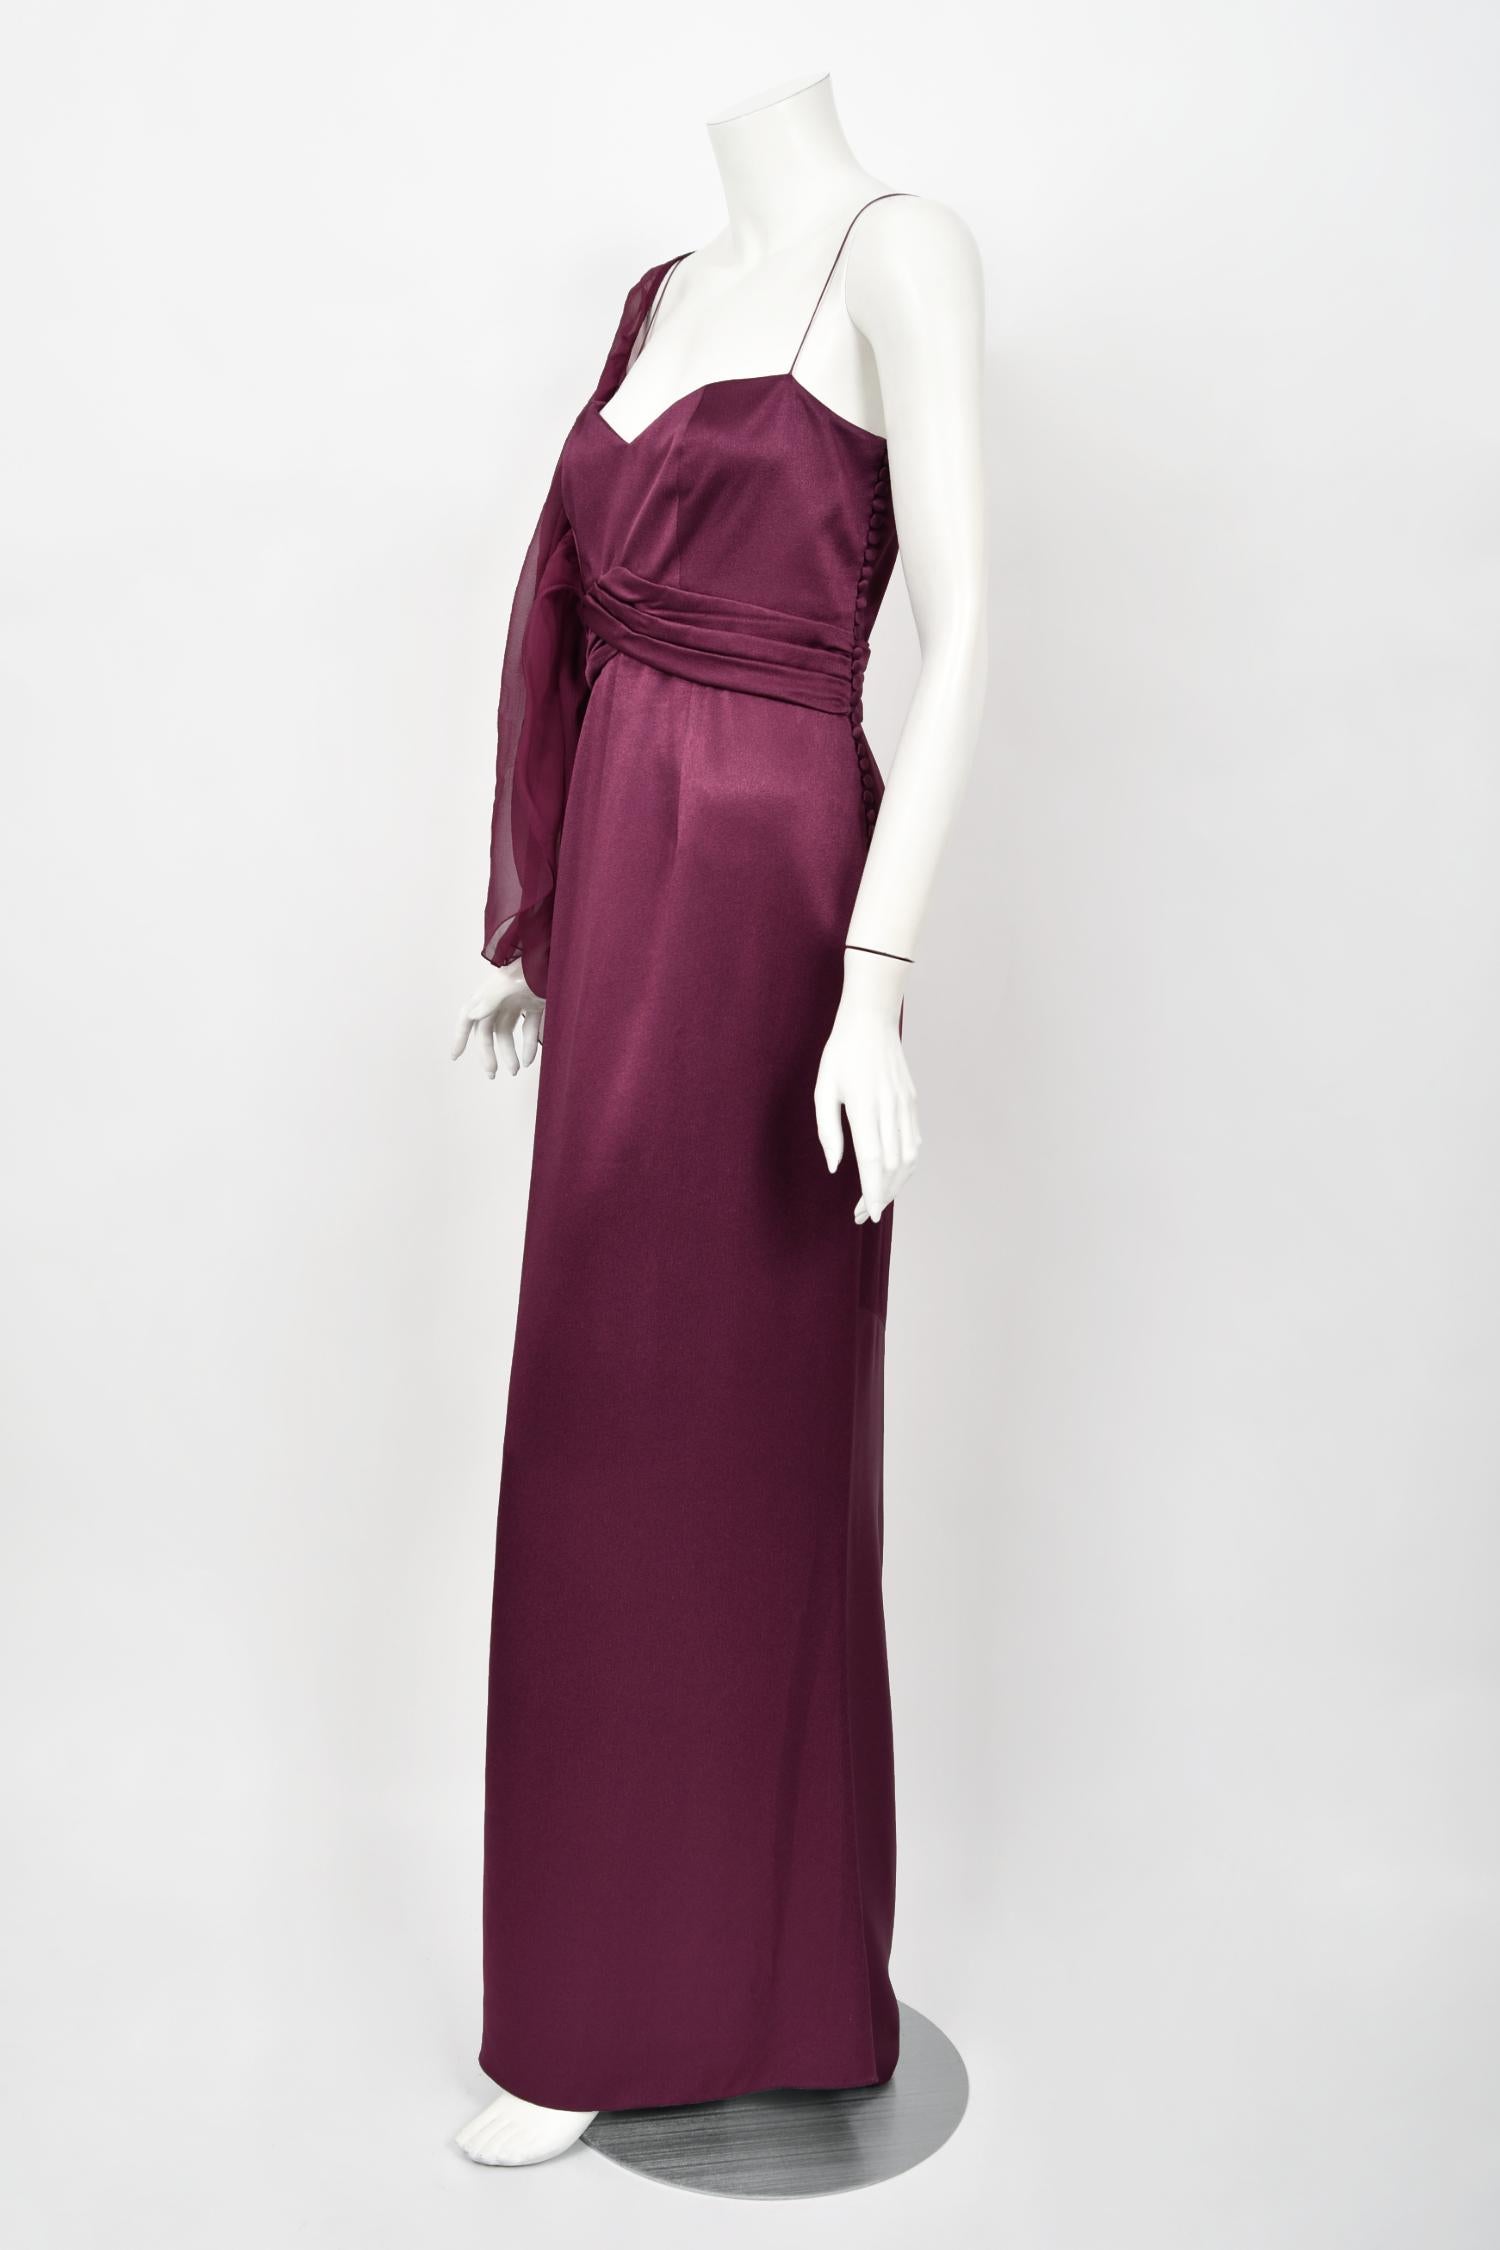 2000 Christian Dior by Galliano Purple Silk Sheer-Sleeve Asymmetric Draped Gown For Sale 1